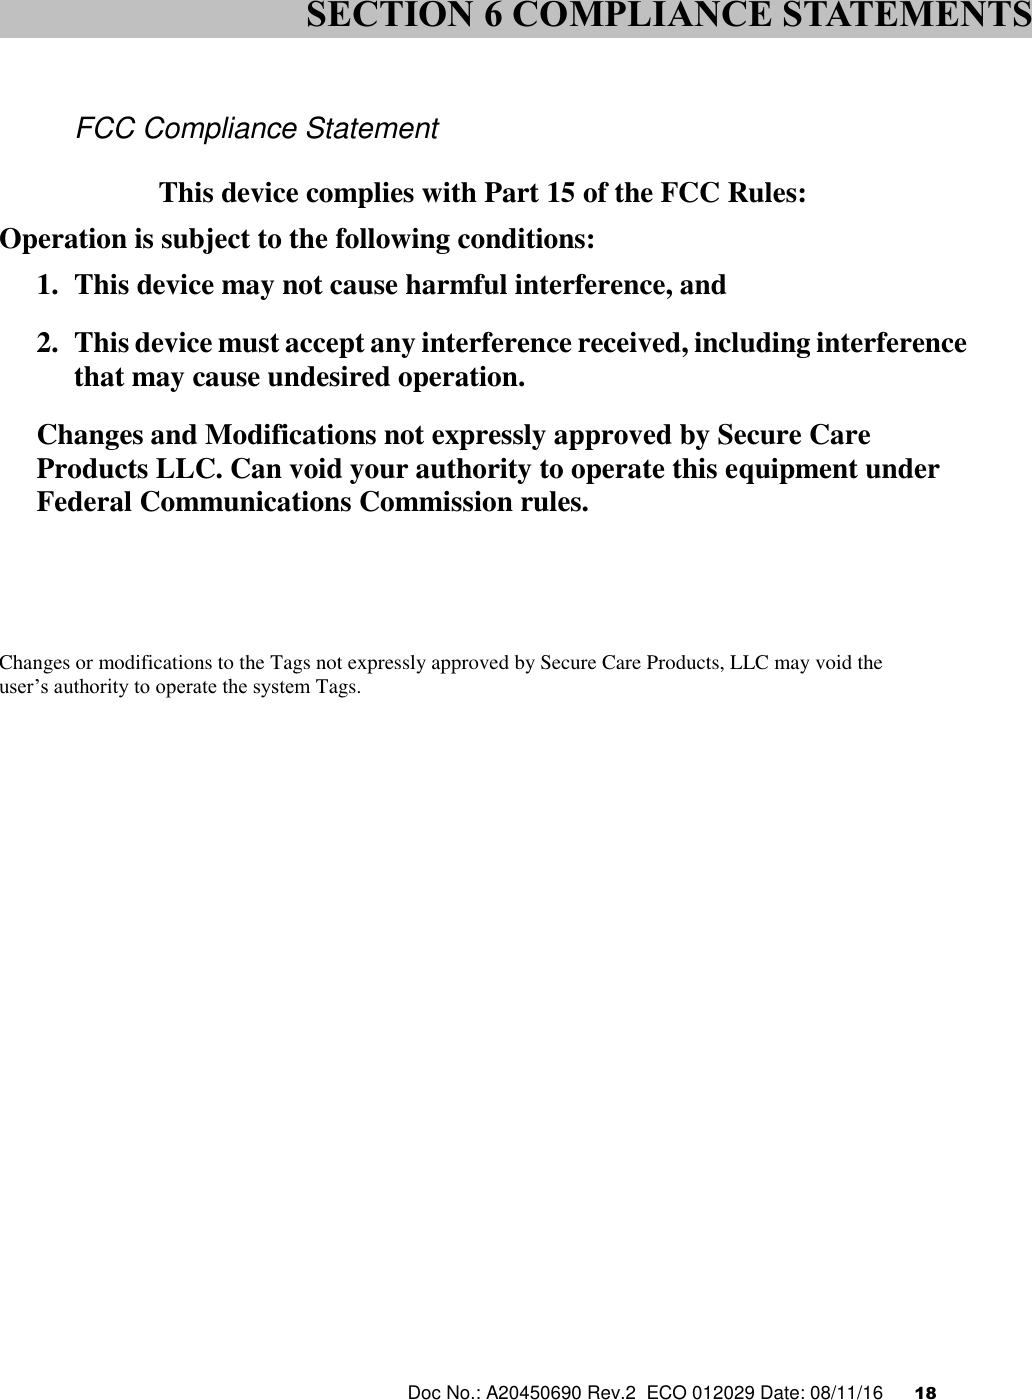  Doc No.: A20450690 Rev.2  ECO 012029 Date: 08/11/16      18     FCC Compliance Statement  This device complies with Part 15 of the FCC Rules: Operation is subject to the following conditions: 1. This device may not cause harmful interference, and 2. This device must accept any interference received, including interference that may cause undesired operation. Changes and Modifications not expressly approved by Secure Care Products LLC. Can void your authority to operate this equipment under Federal Communications Commission rules.      Changes or modifications to the Tags not expressly approved by Secure Care Products, LLC may void the  user’s authority to operate the system Tags.     SECTION 6 COMPLIANCE STATEMENTS 